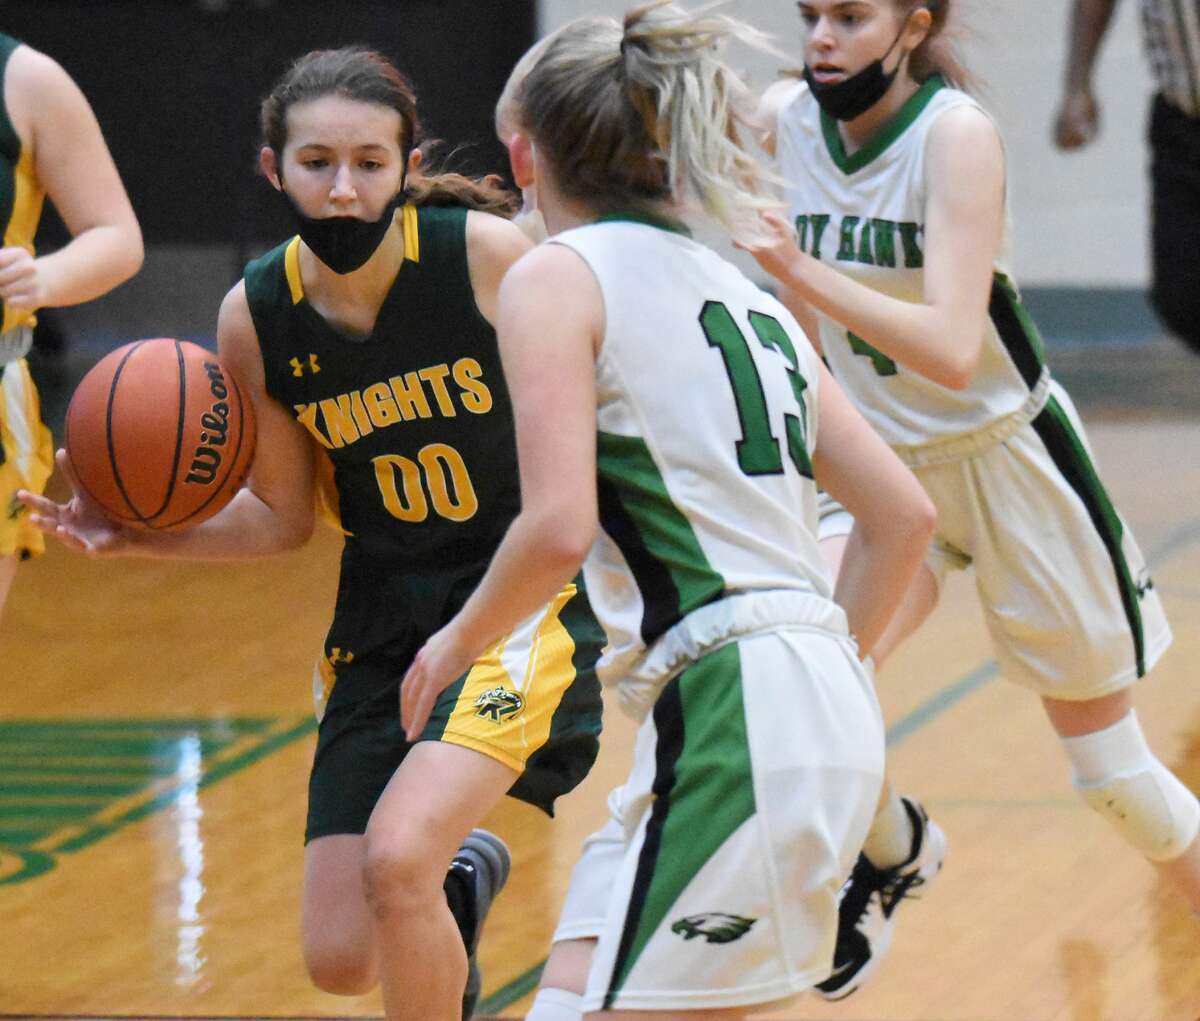 Metro-East Lutheran's Sarah Huber scored a game-high 12 points and grabbed 10 rebounds to finish with a double-double in a season-opening win over Valmeyer on Monday in Dupo.